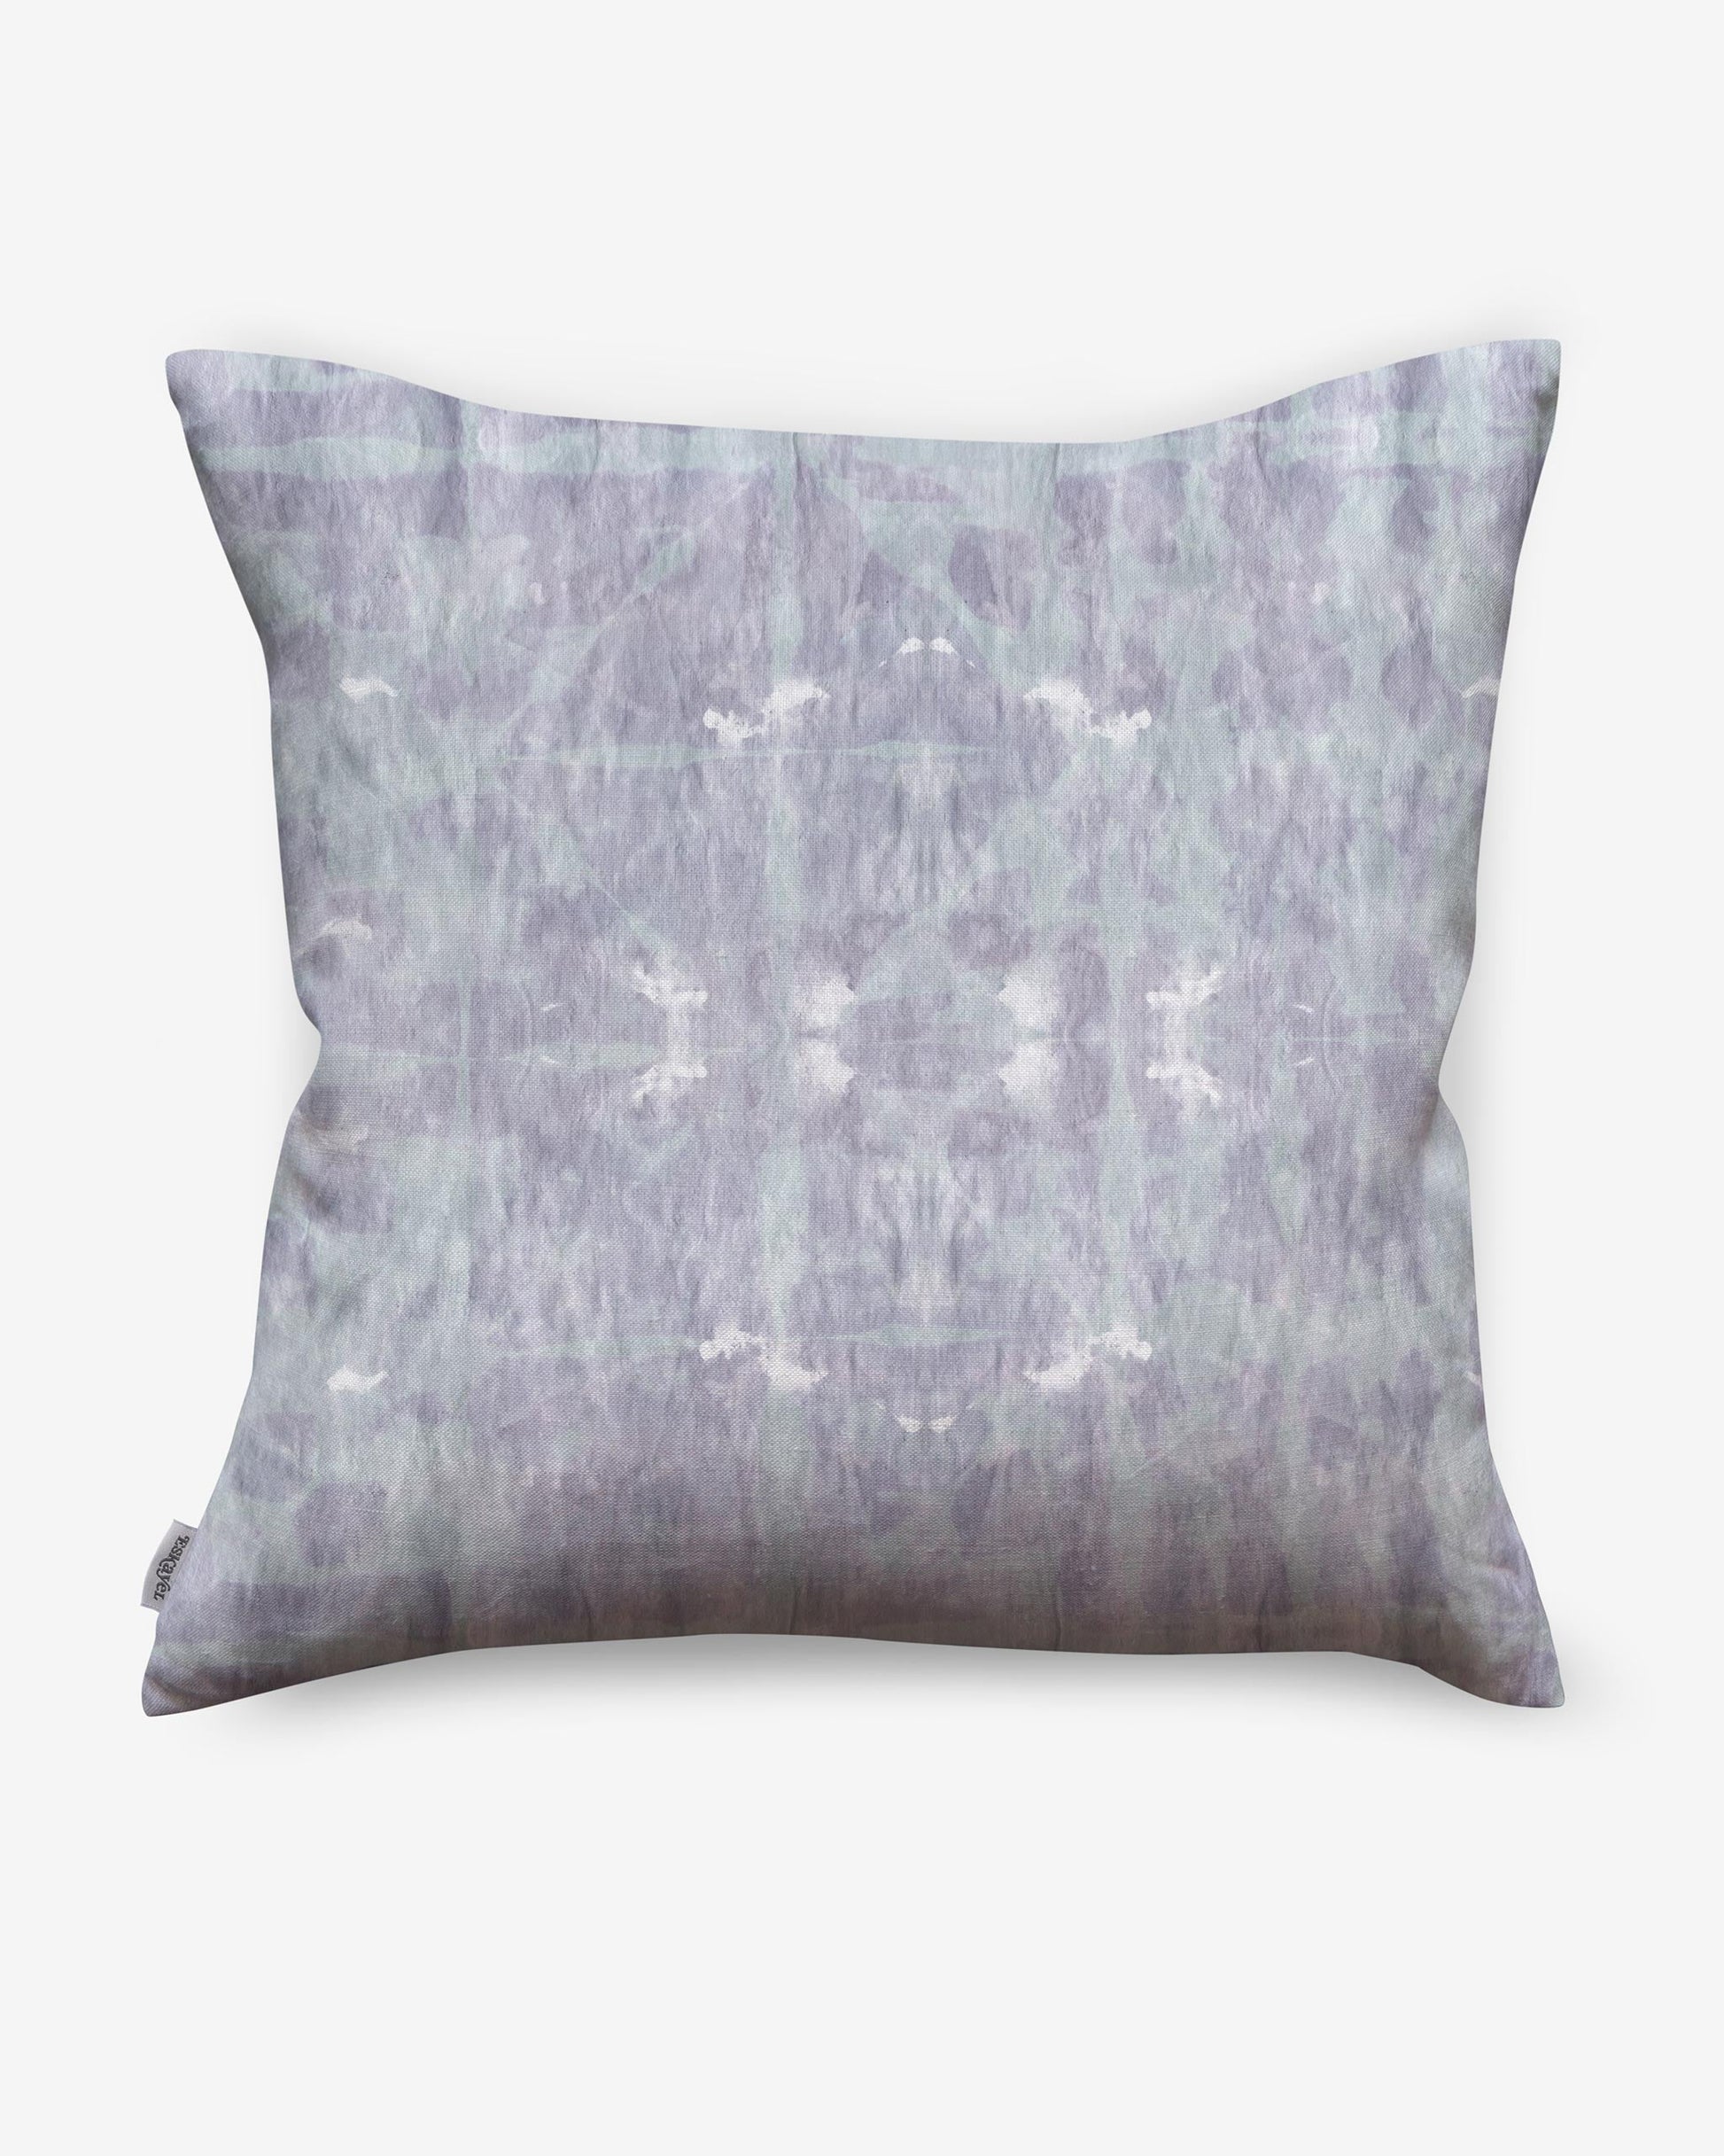 A pillow with a blue and white Banda Pillow||Cay pattern on it.